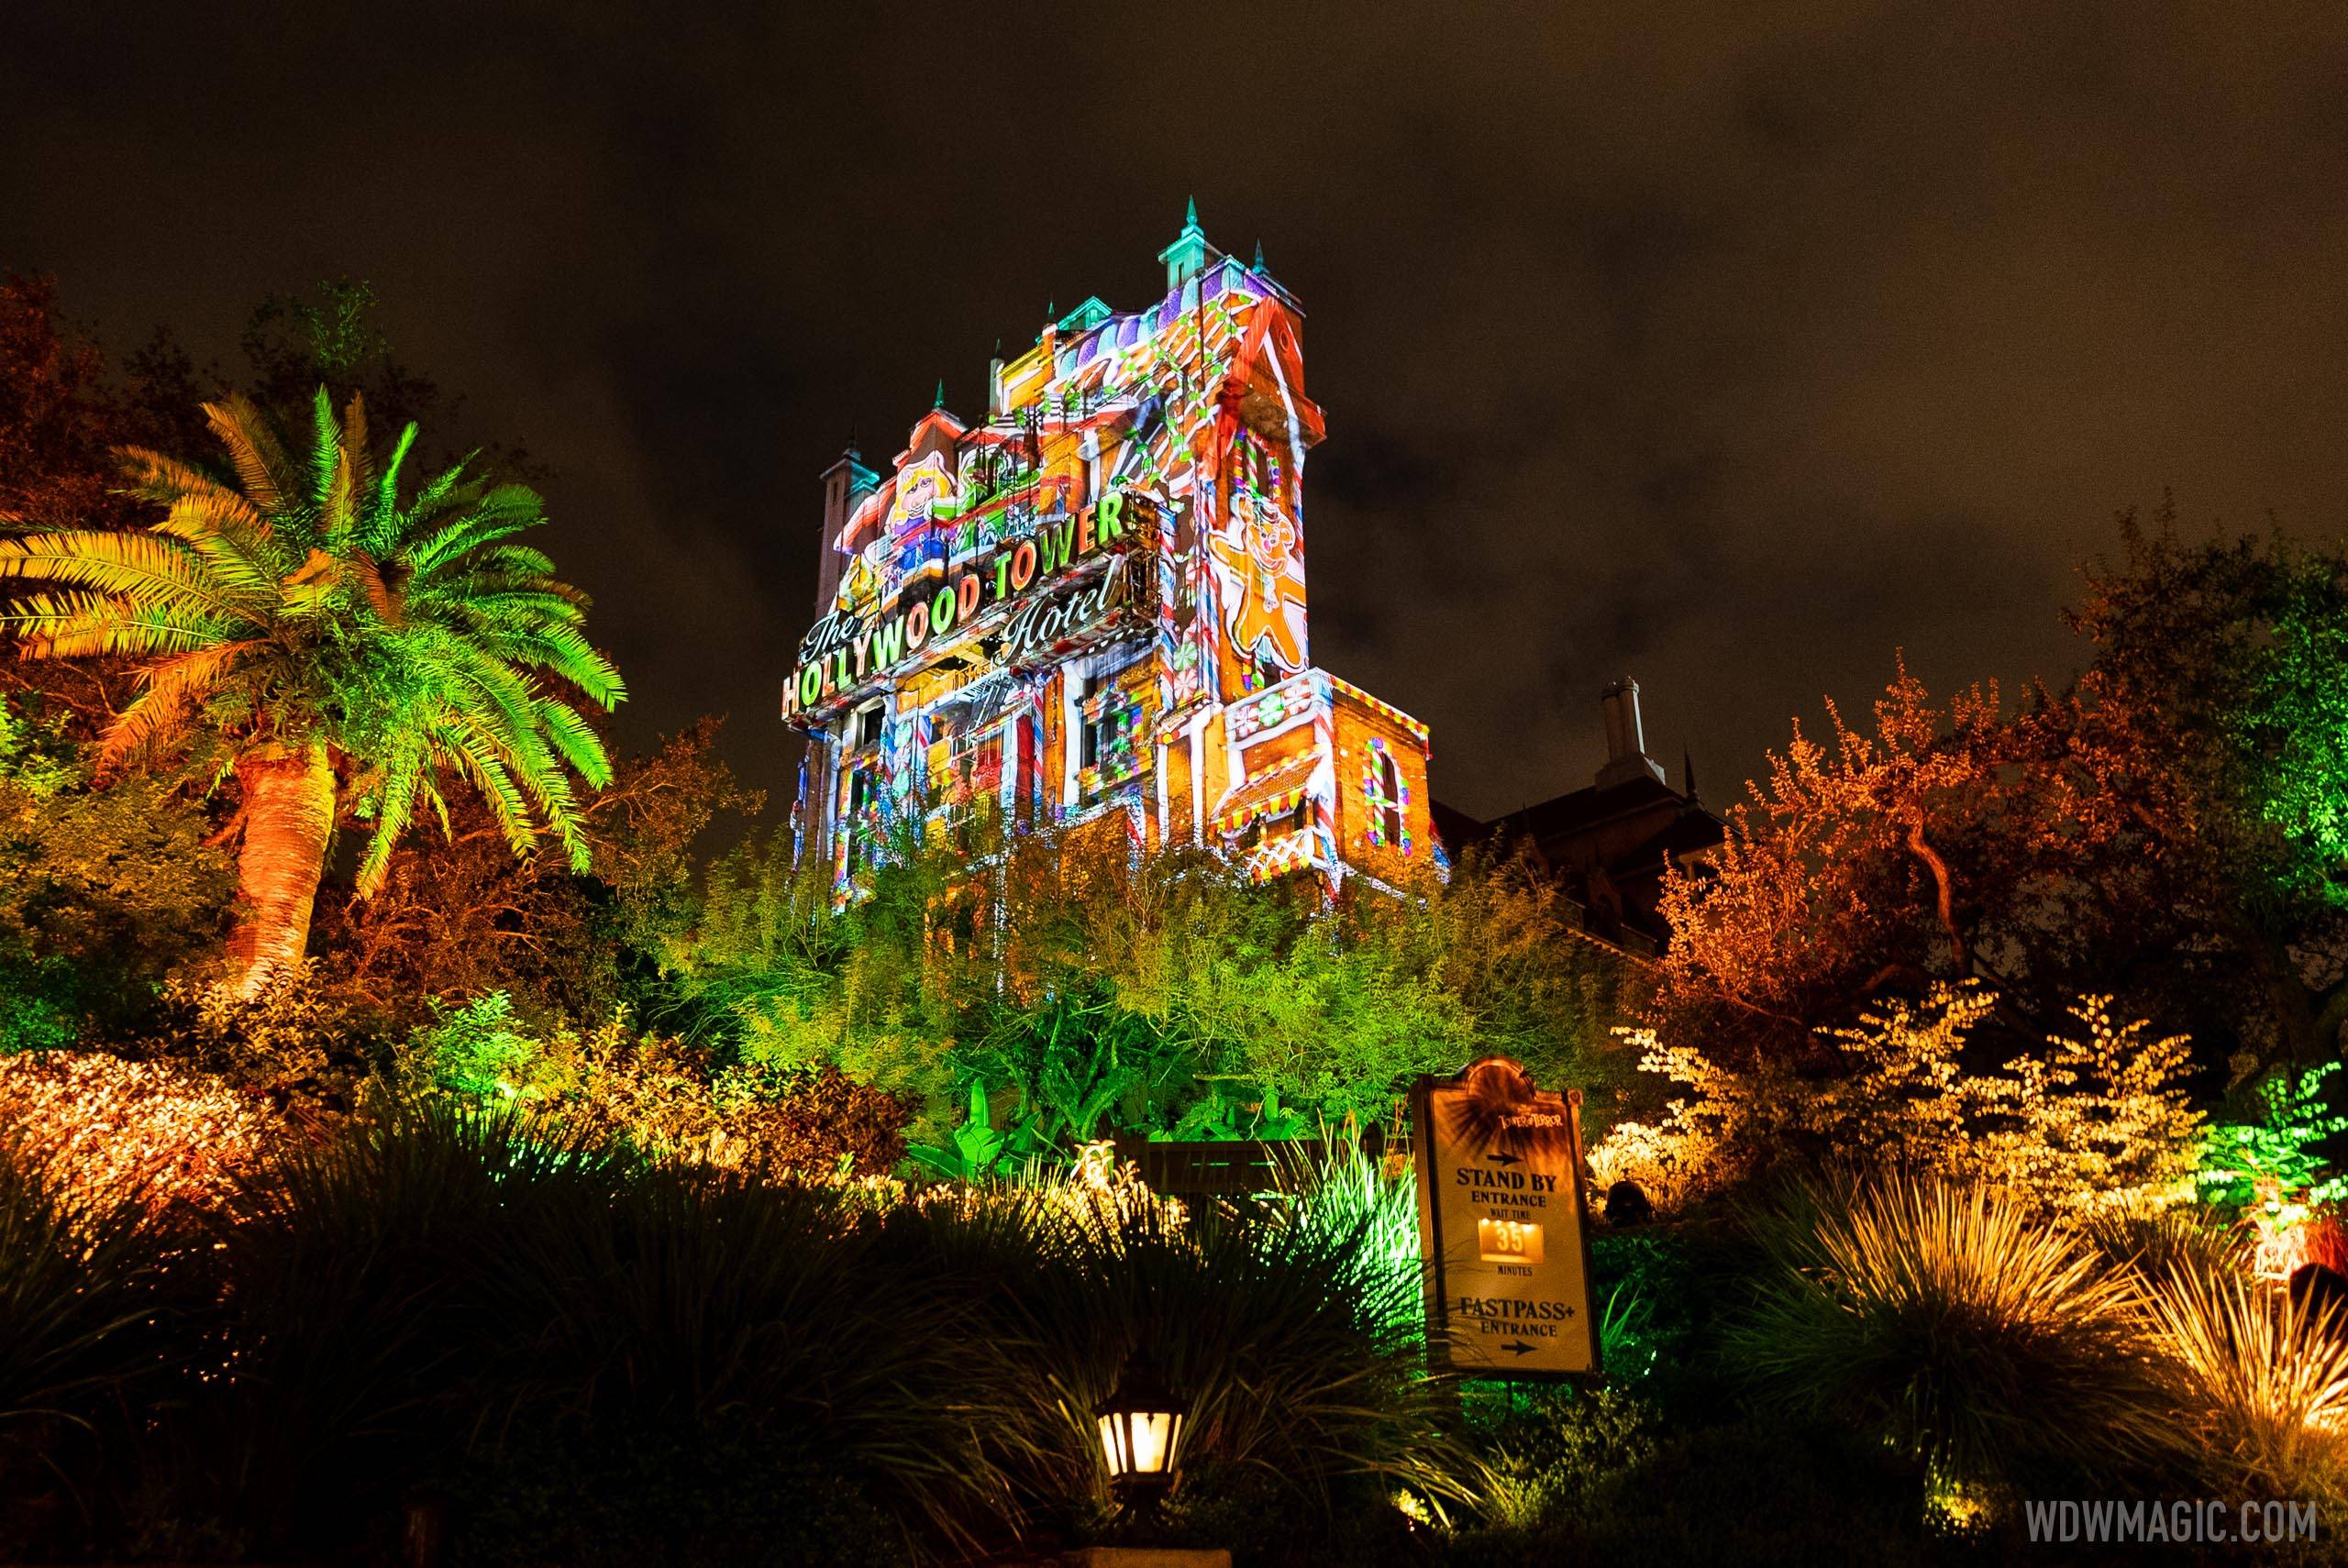 PHOTOS - Hollywood Holiday Tower Hotel projection effects at Disney's Hollywood Studios